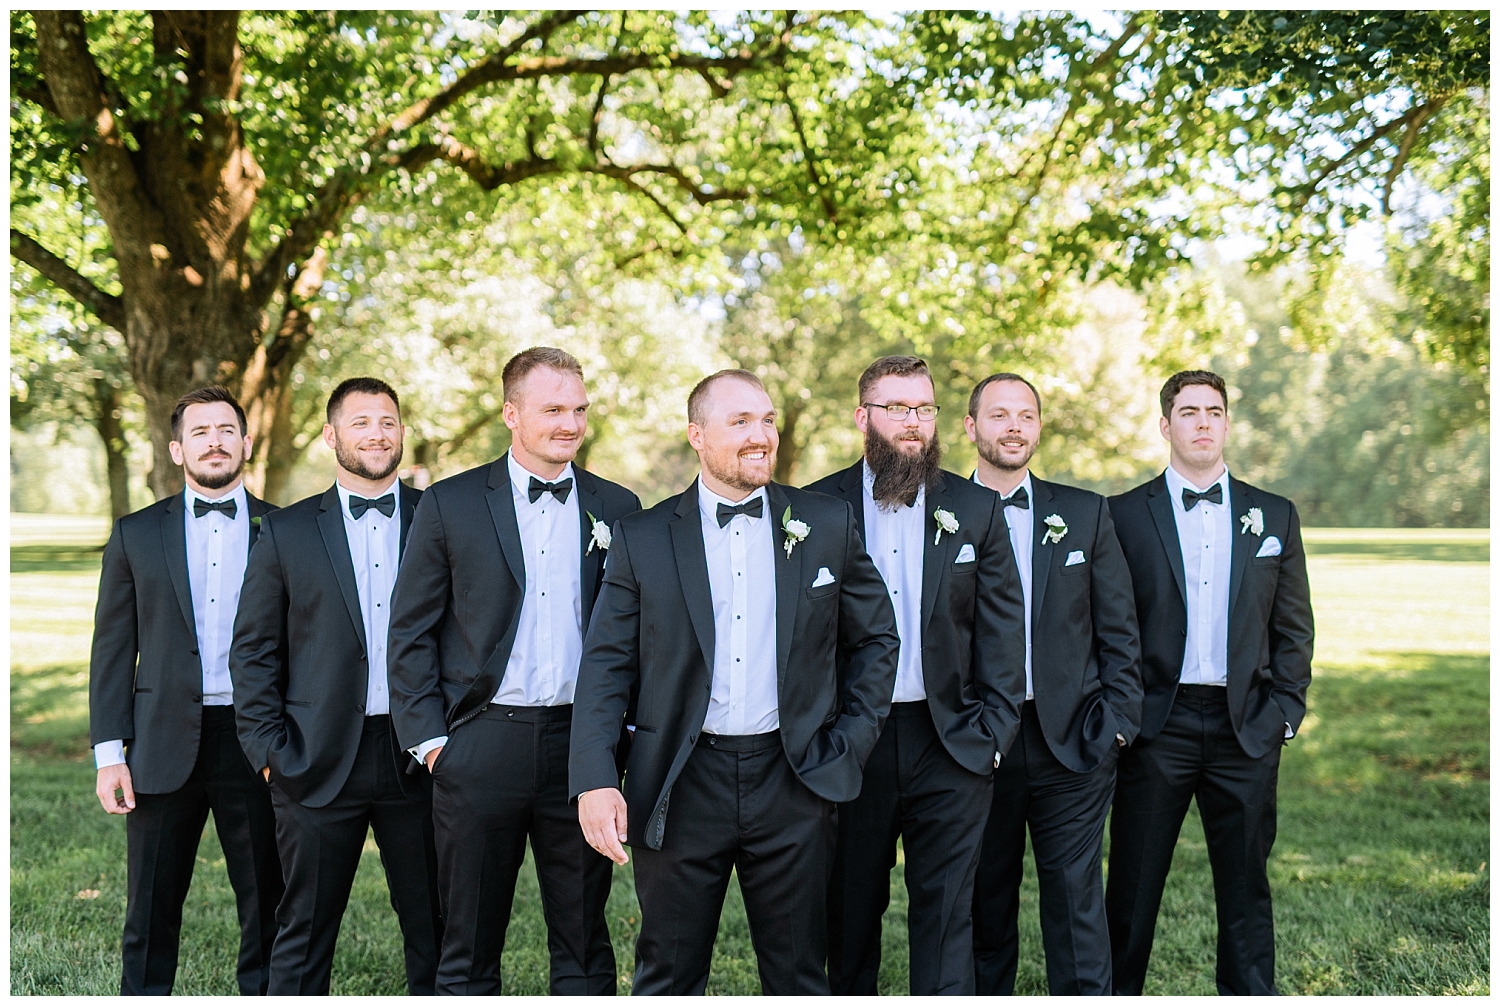 Groom and groomsmen portraits at Castle Hill Cidery